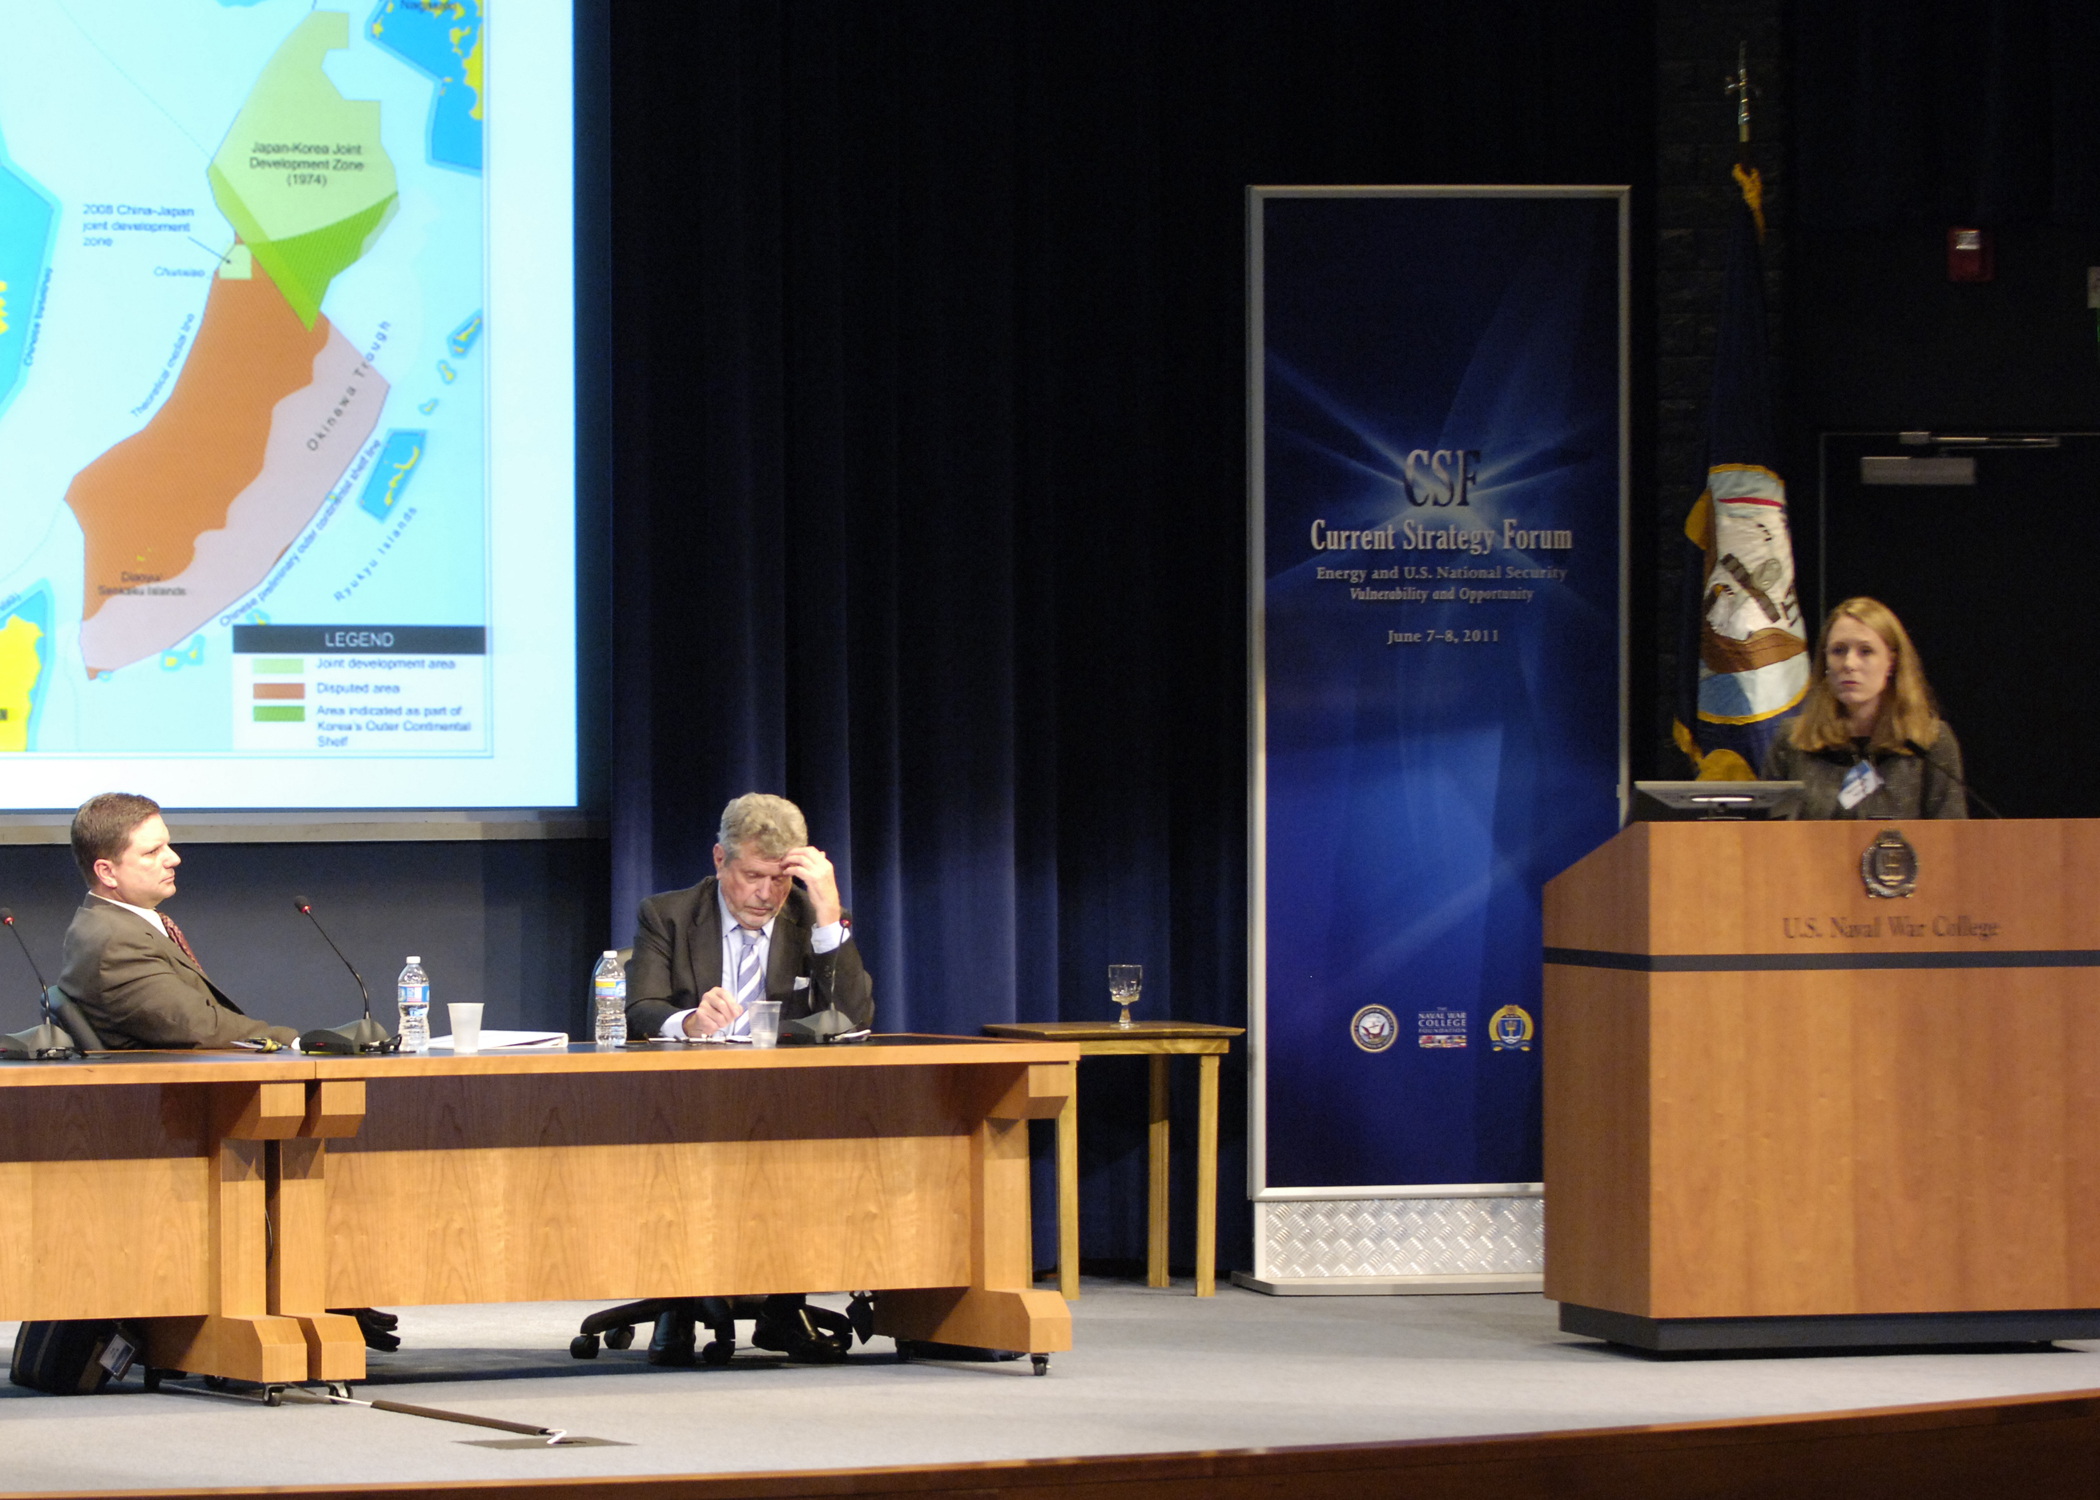 Naval War College Current Strategy Forum: Energy and US National Security Vulnerability and Opportunity